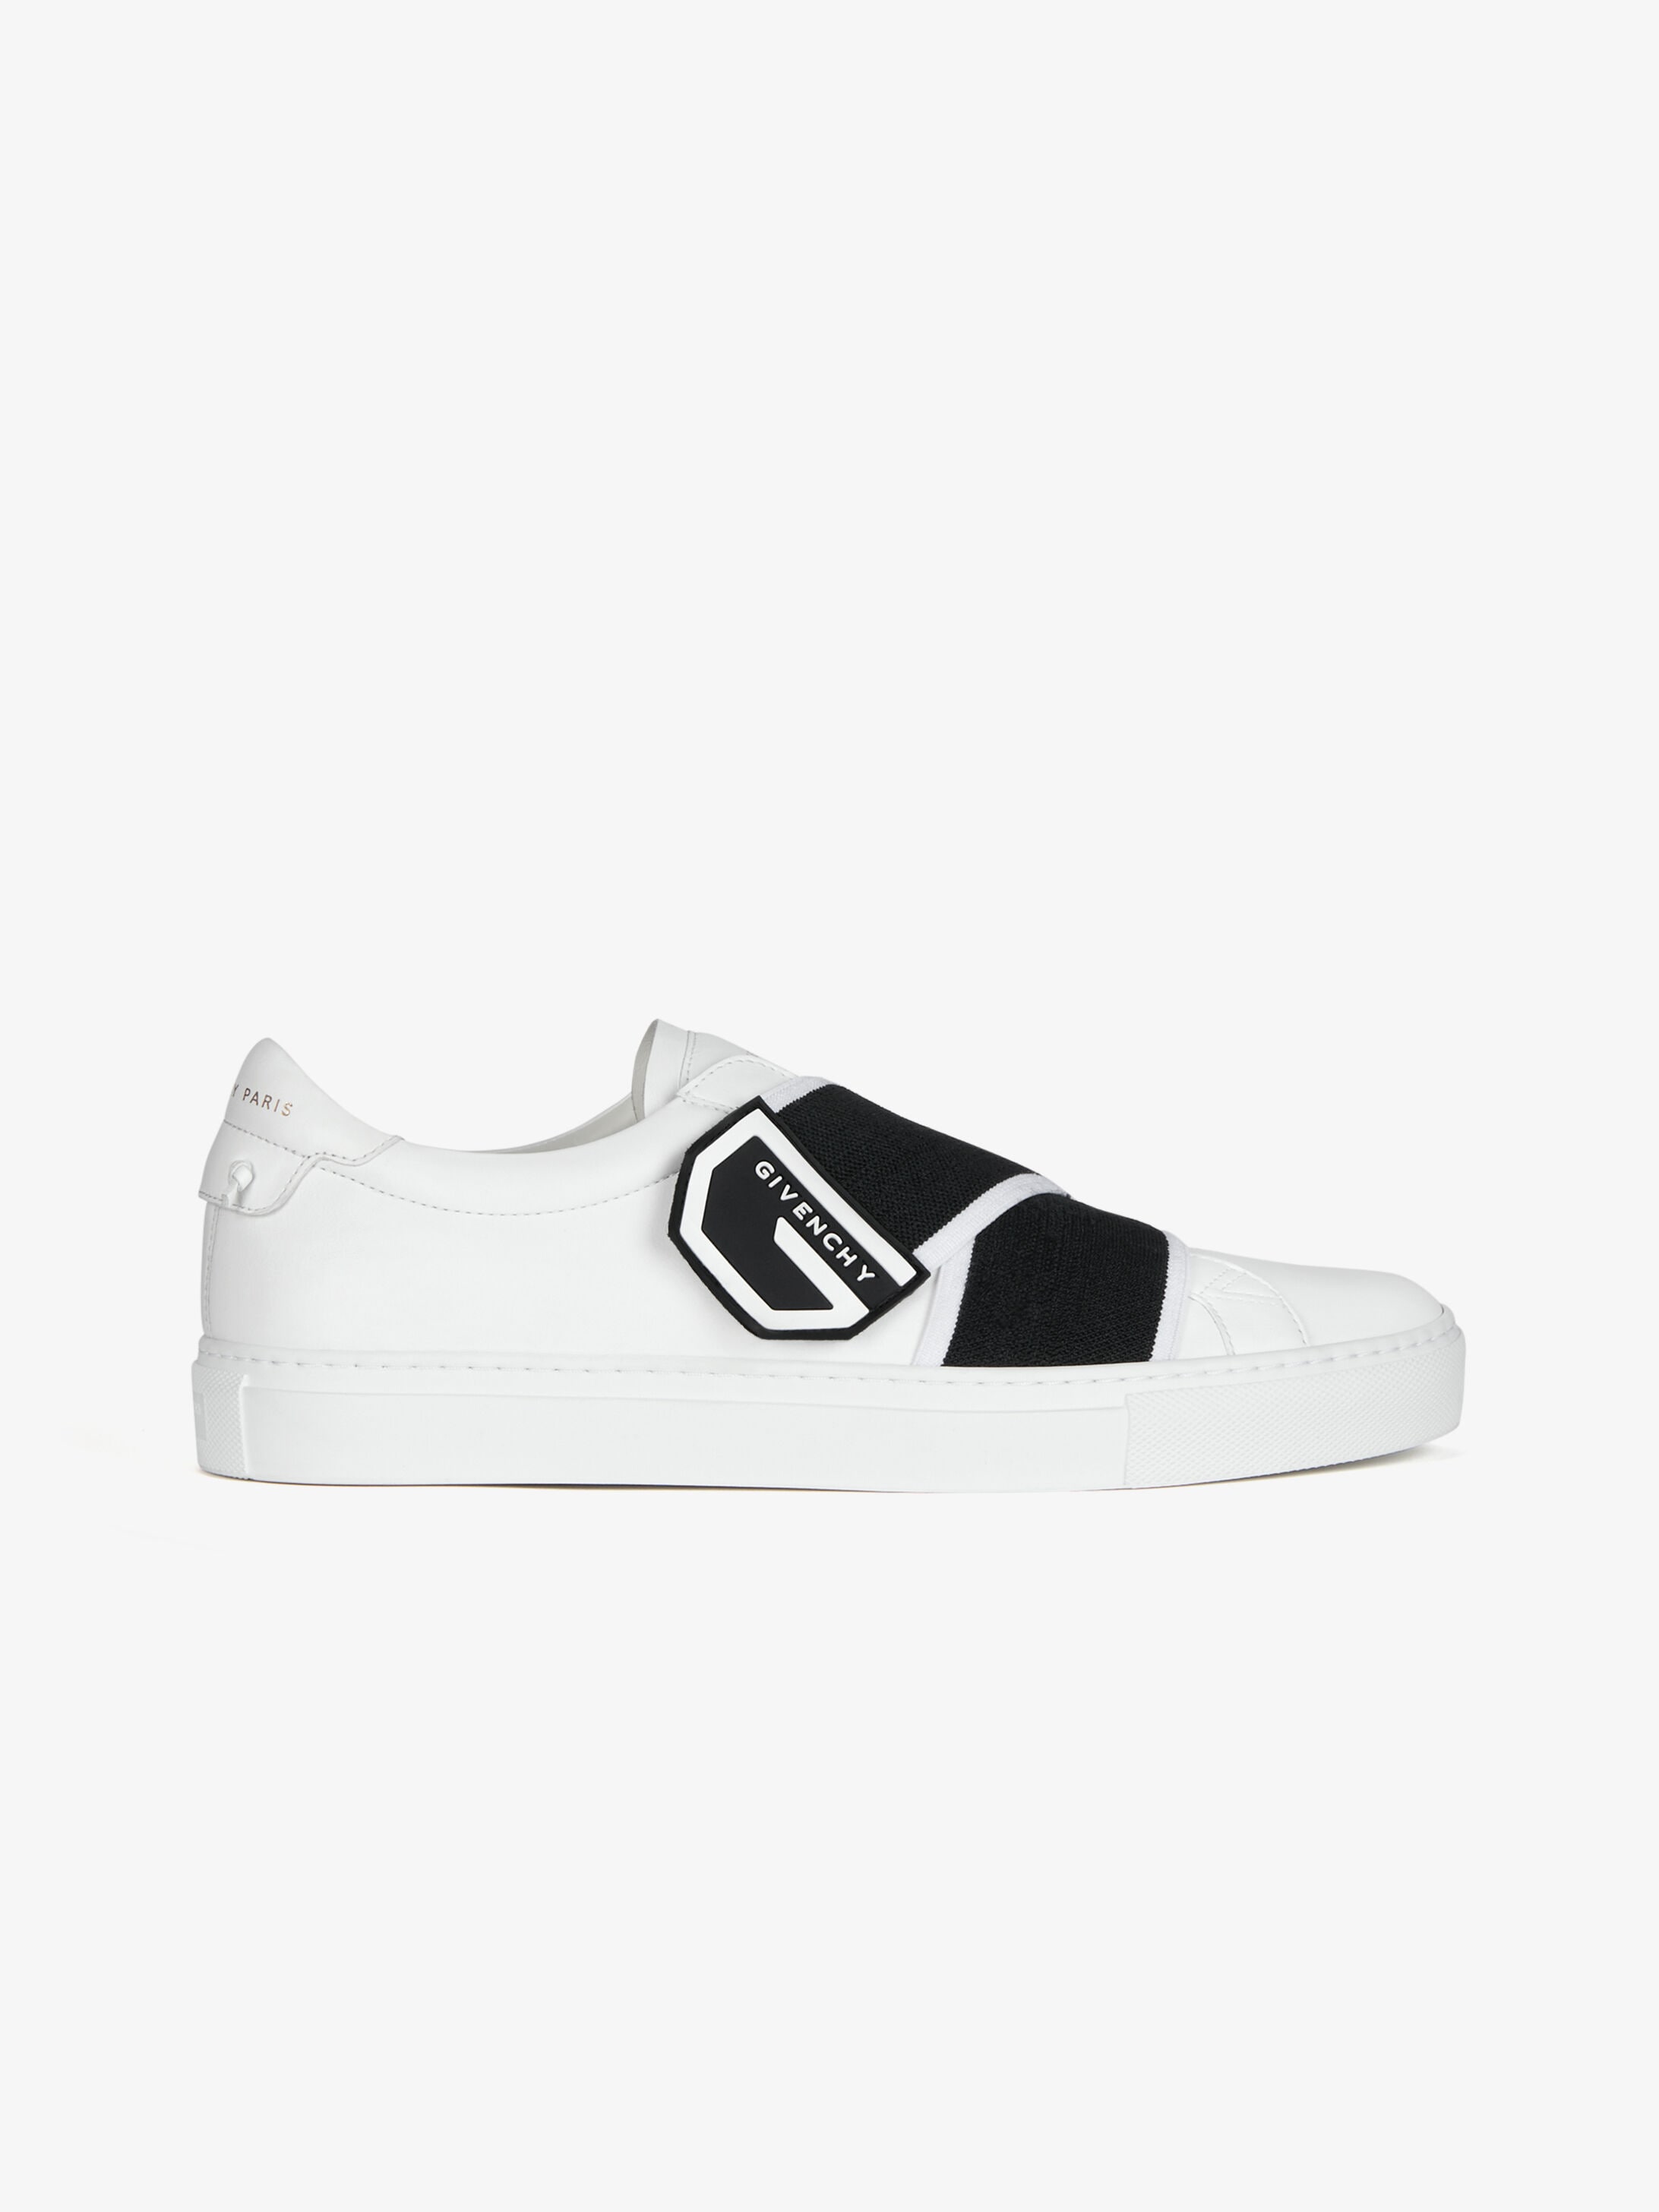 givenchy gym shoes